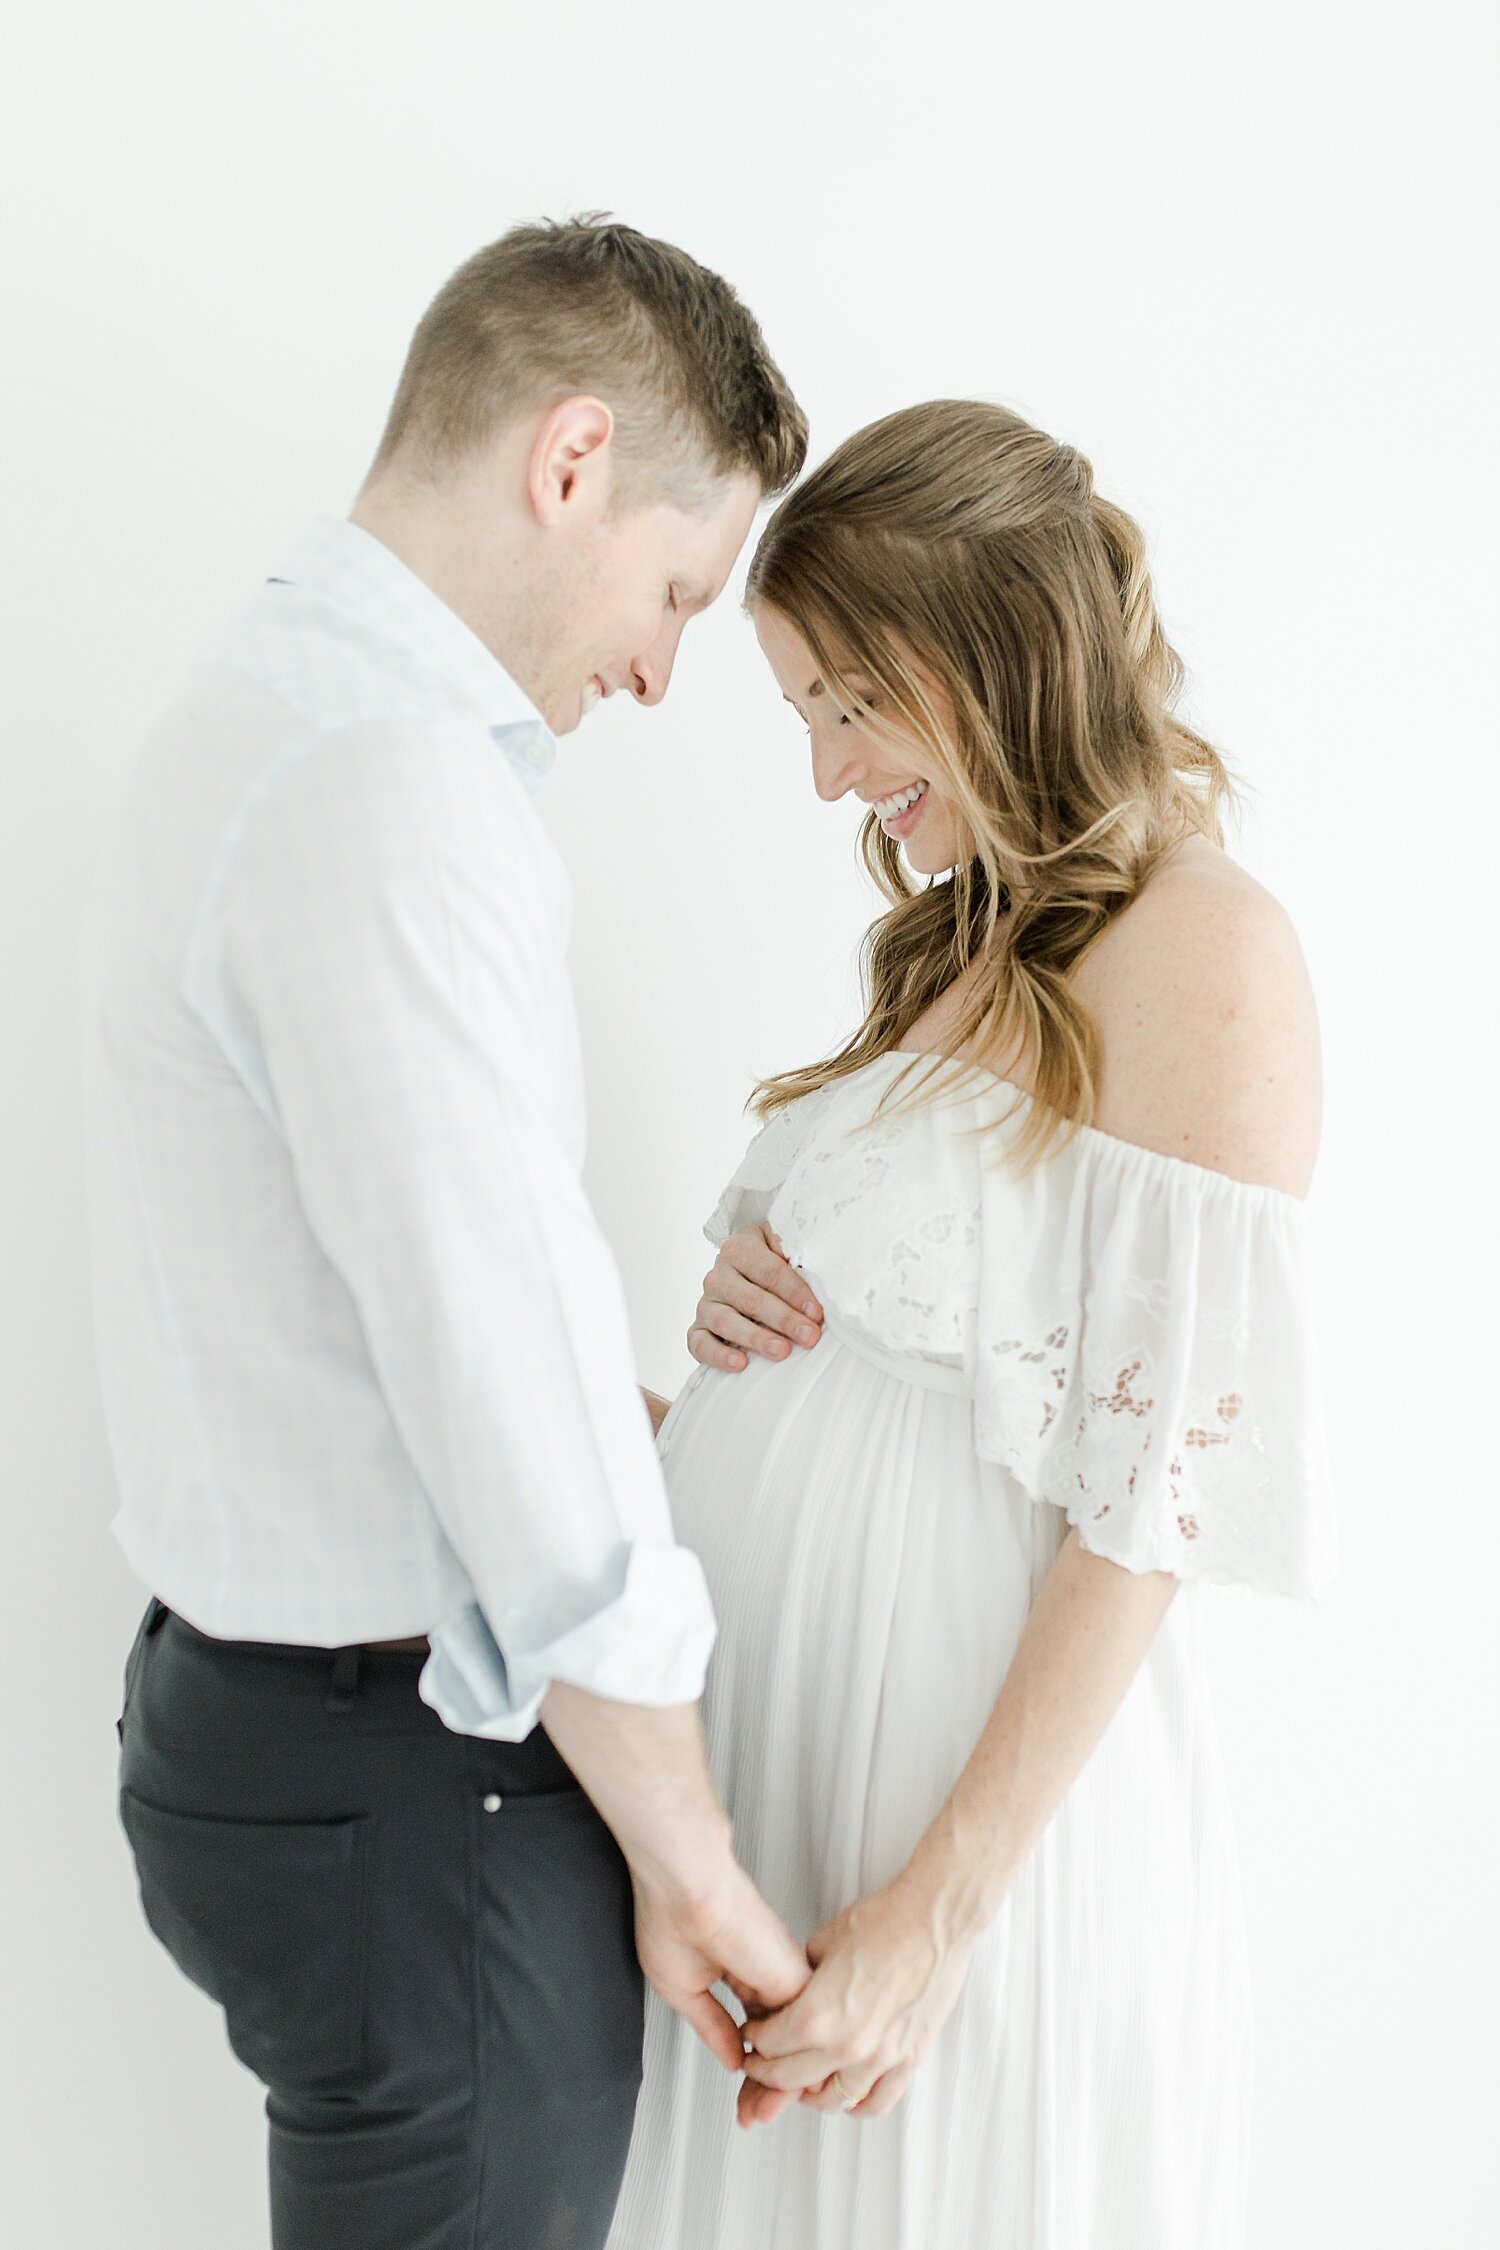 Maternity photos in photography studio in Connecticut | Kristin Wood Photography